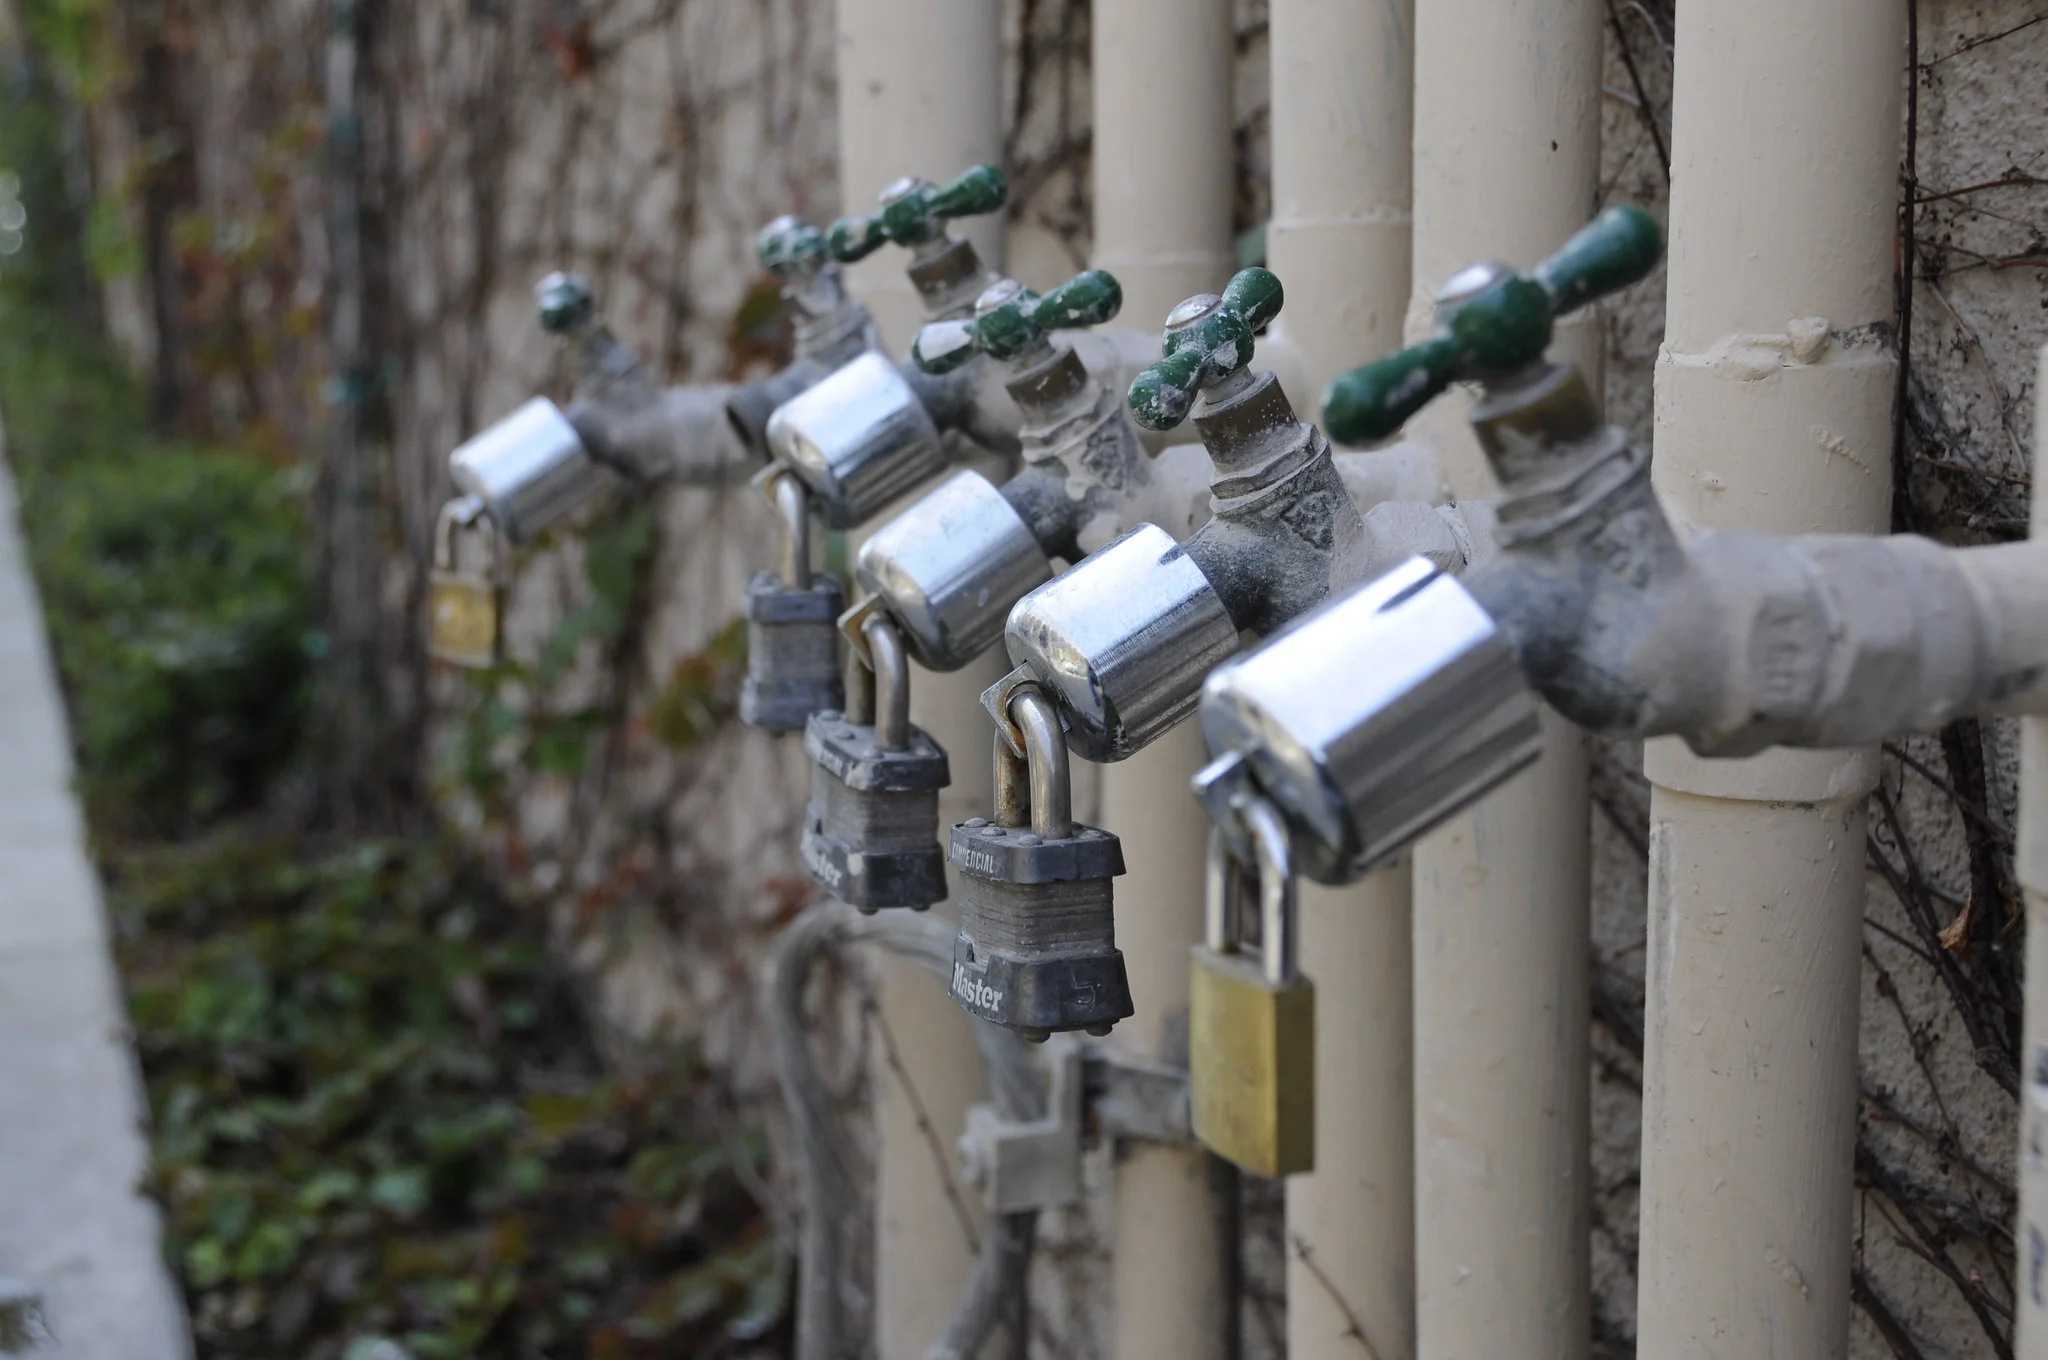 A row of water pipes with locks on them_philanthropy needs to pay what it takes